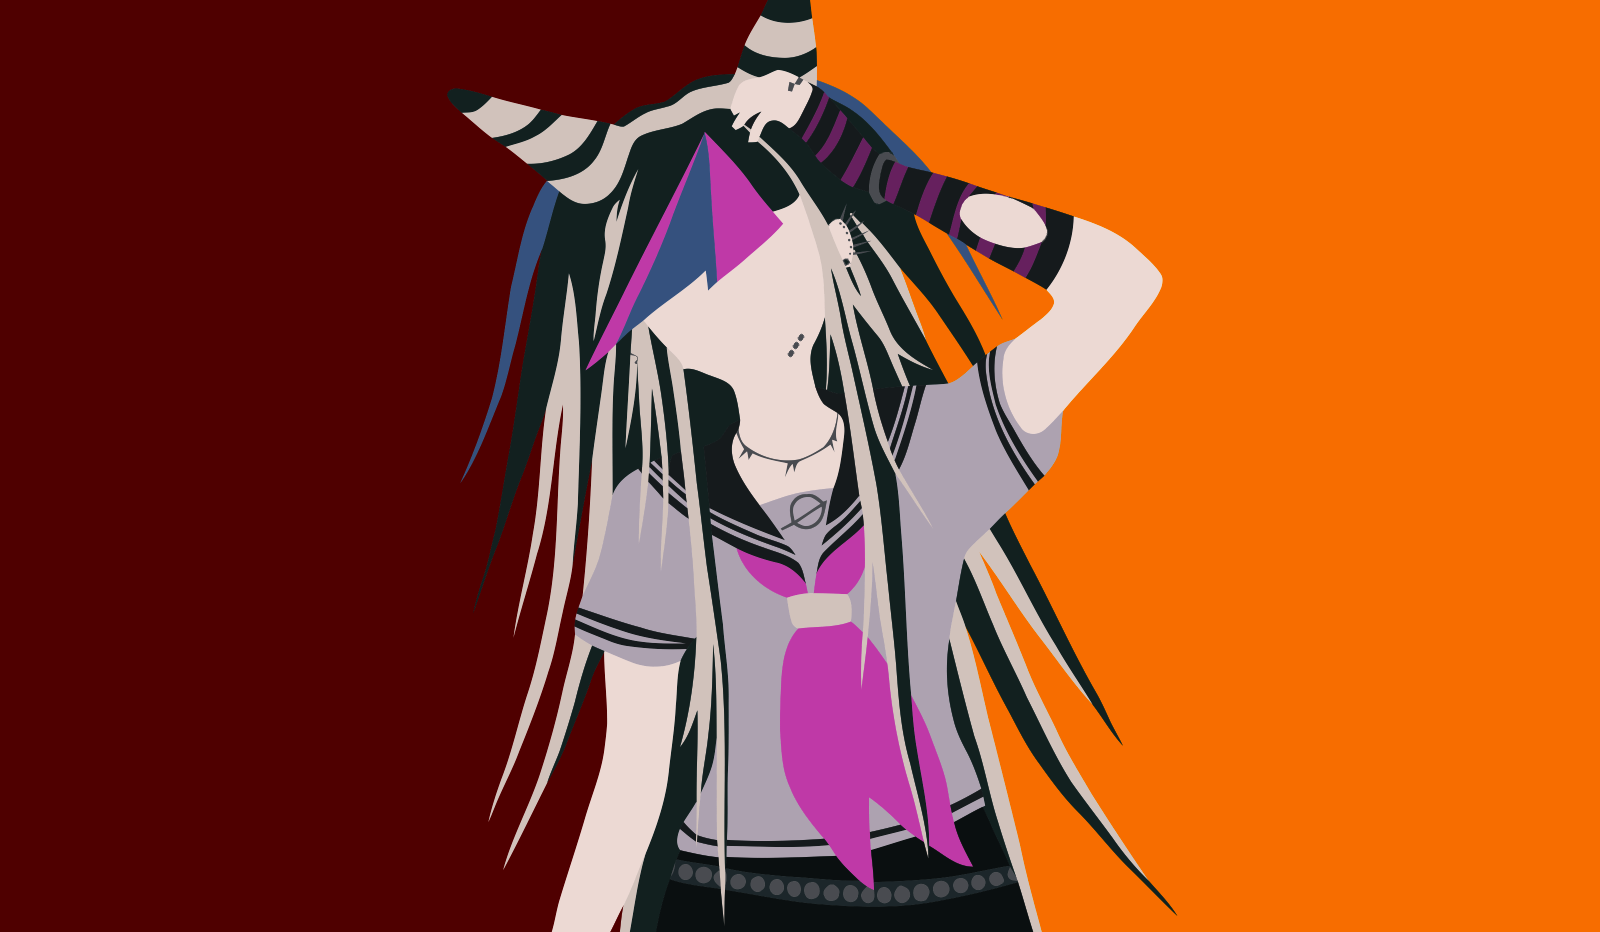 Made a Ibuki wallpapers a while ago and wanted to share: danganronpa.